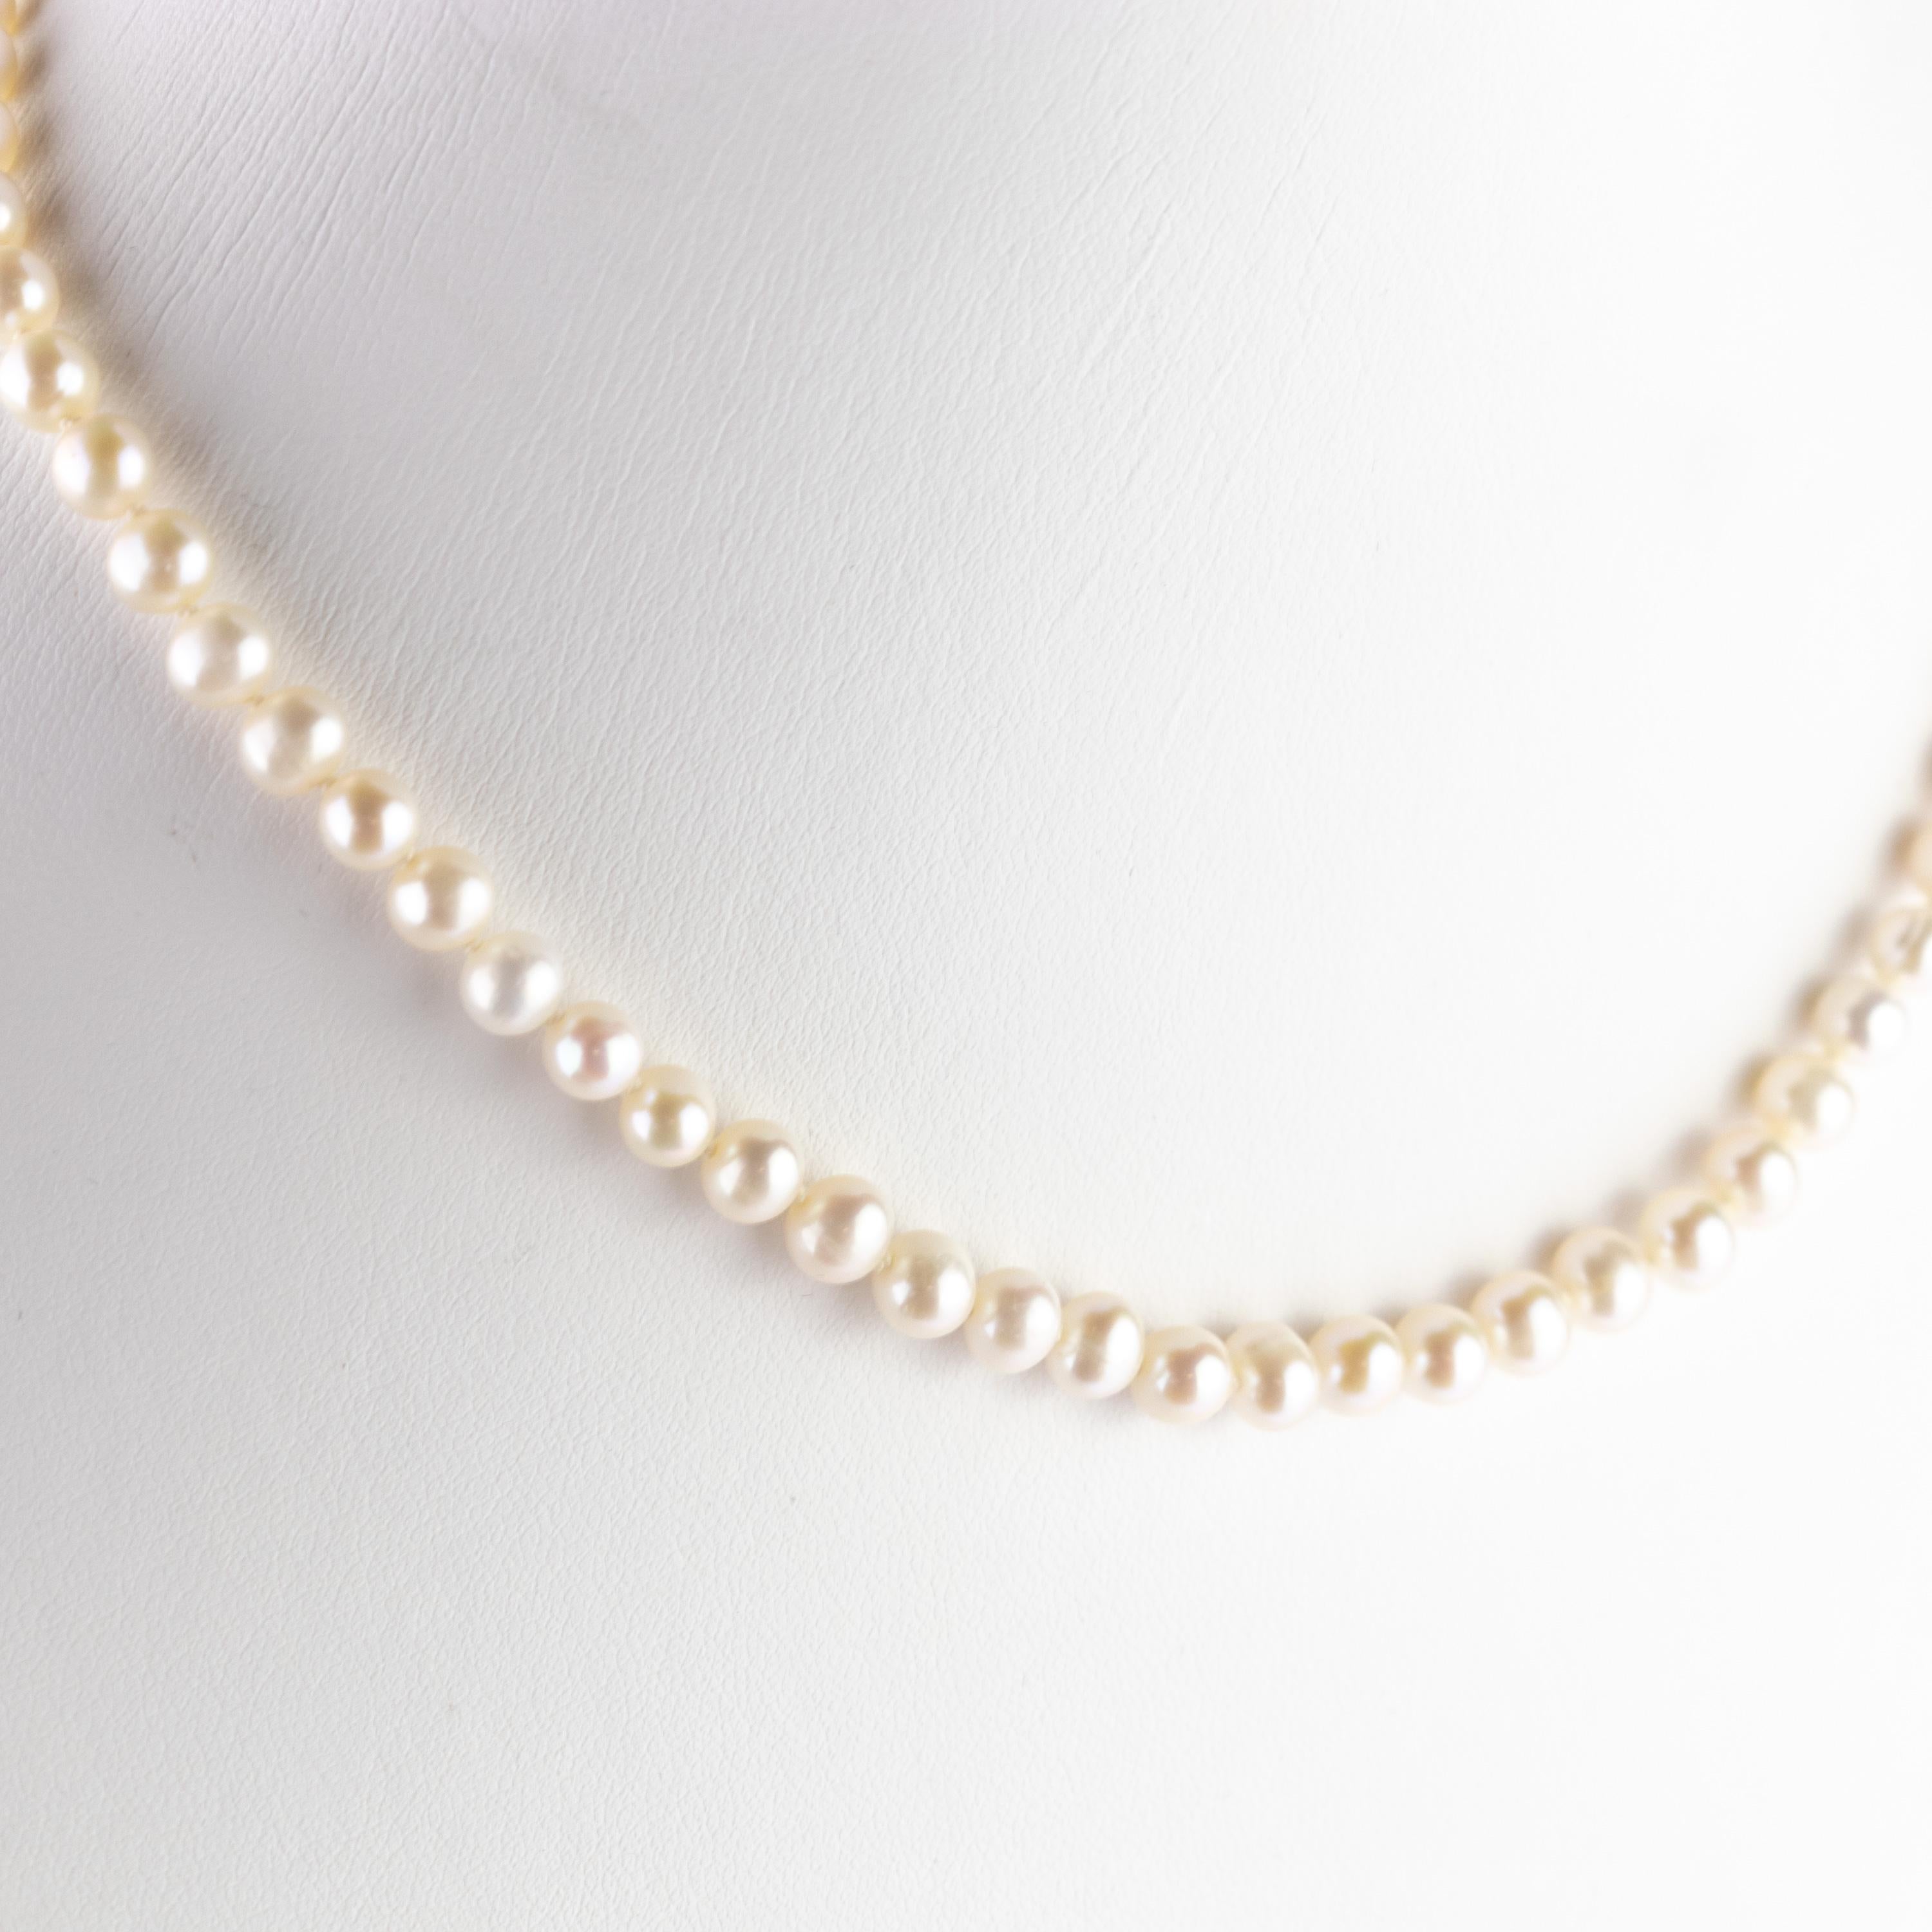 Timeless design first class freshwater pearls with a gentle lobster claw closure in 18k yellow gold. This design shows the simple and unique beauty of a special accessory that will surely enrich with beauty whoever wears it.  An iconic choker for an